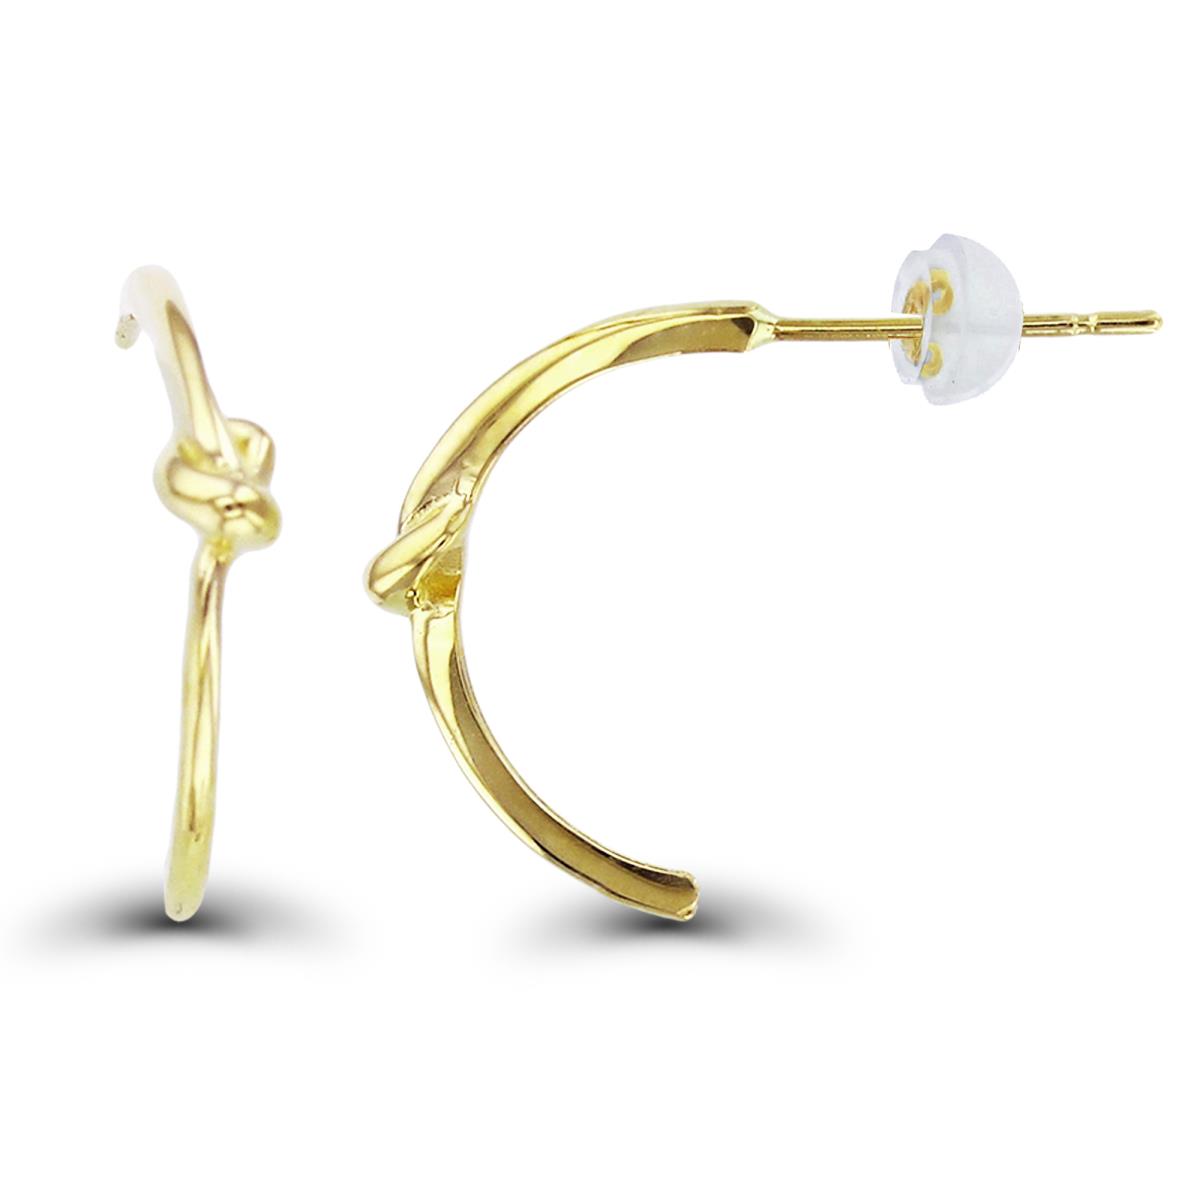 14K Yellow Gold High Polish Knot J-Earrings with Silicon Backs